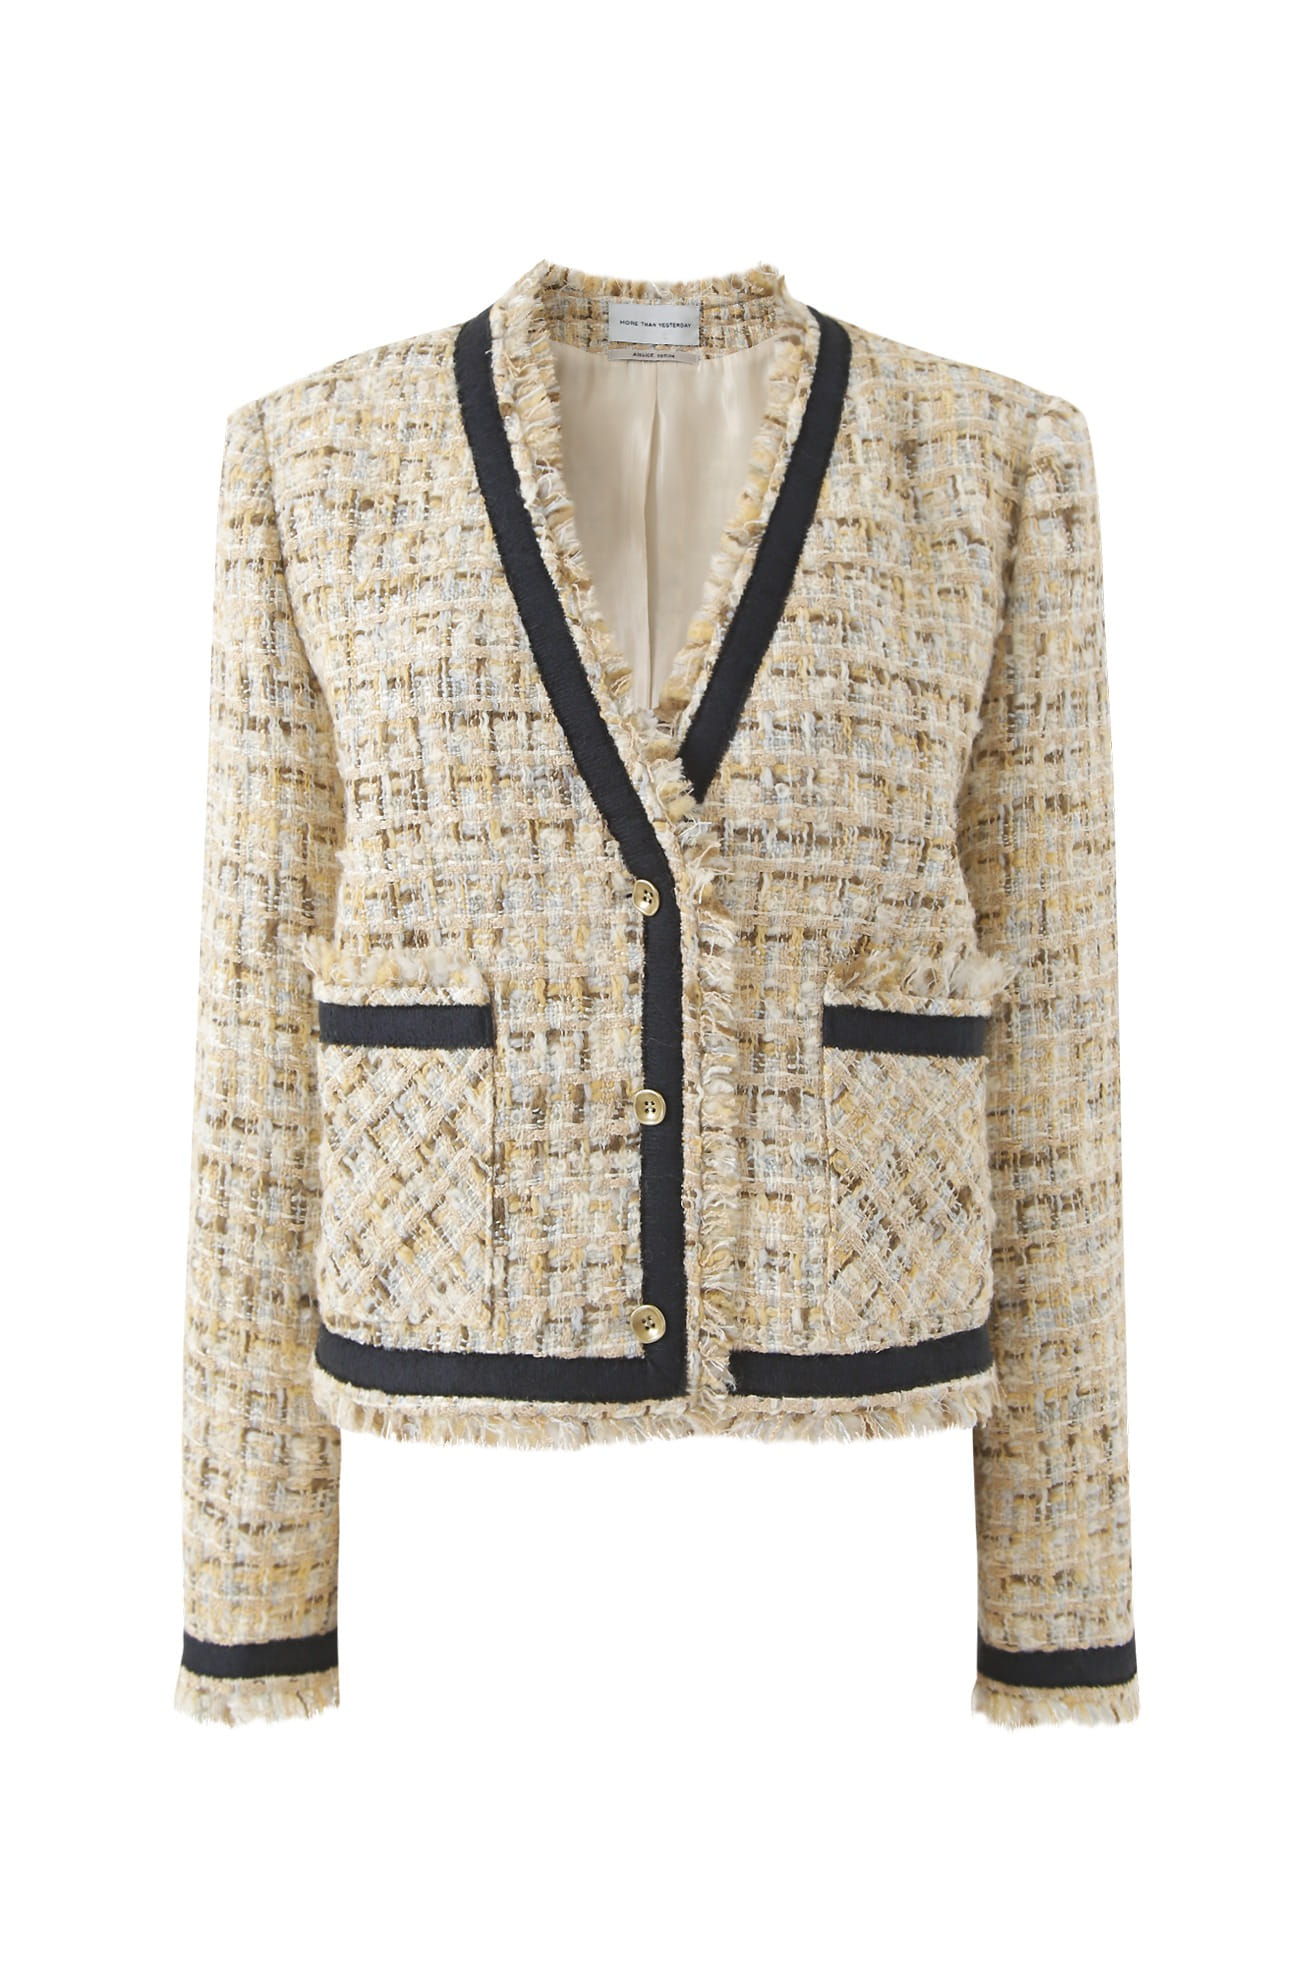 FRINGE TWEED JACKET  <br><sub><mark><strong>ATELIER EDITION </strong></sub><br>